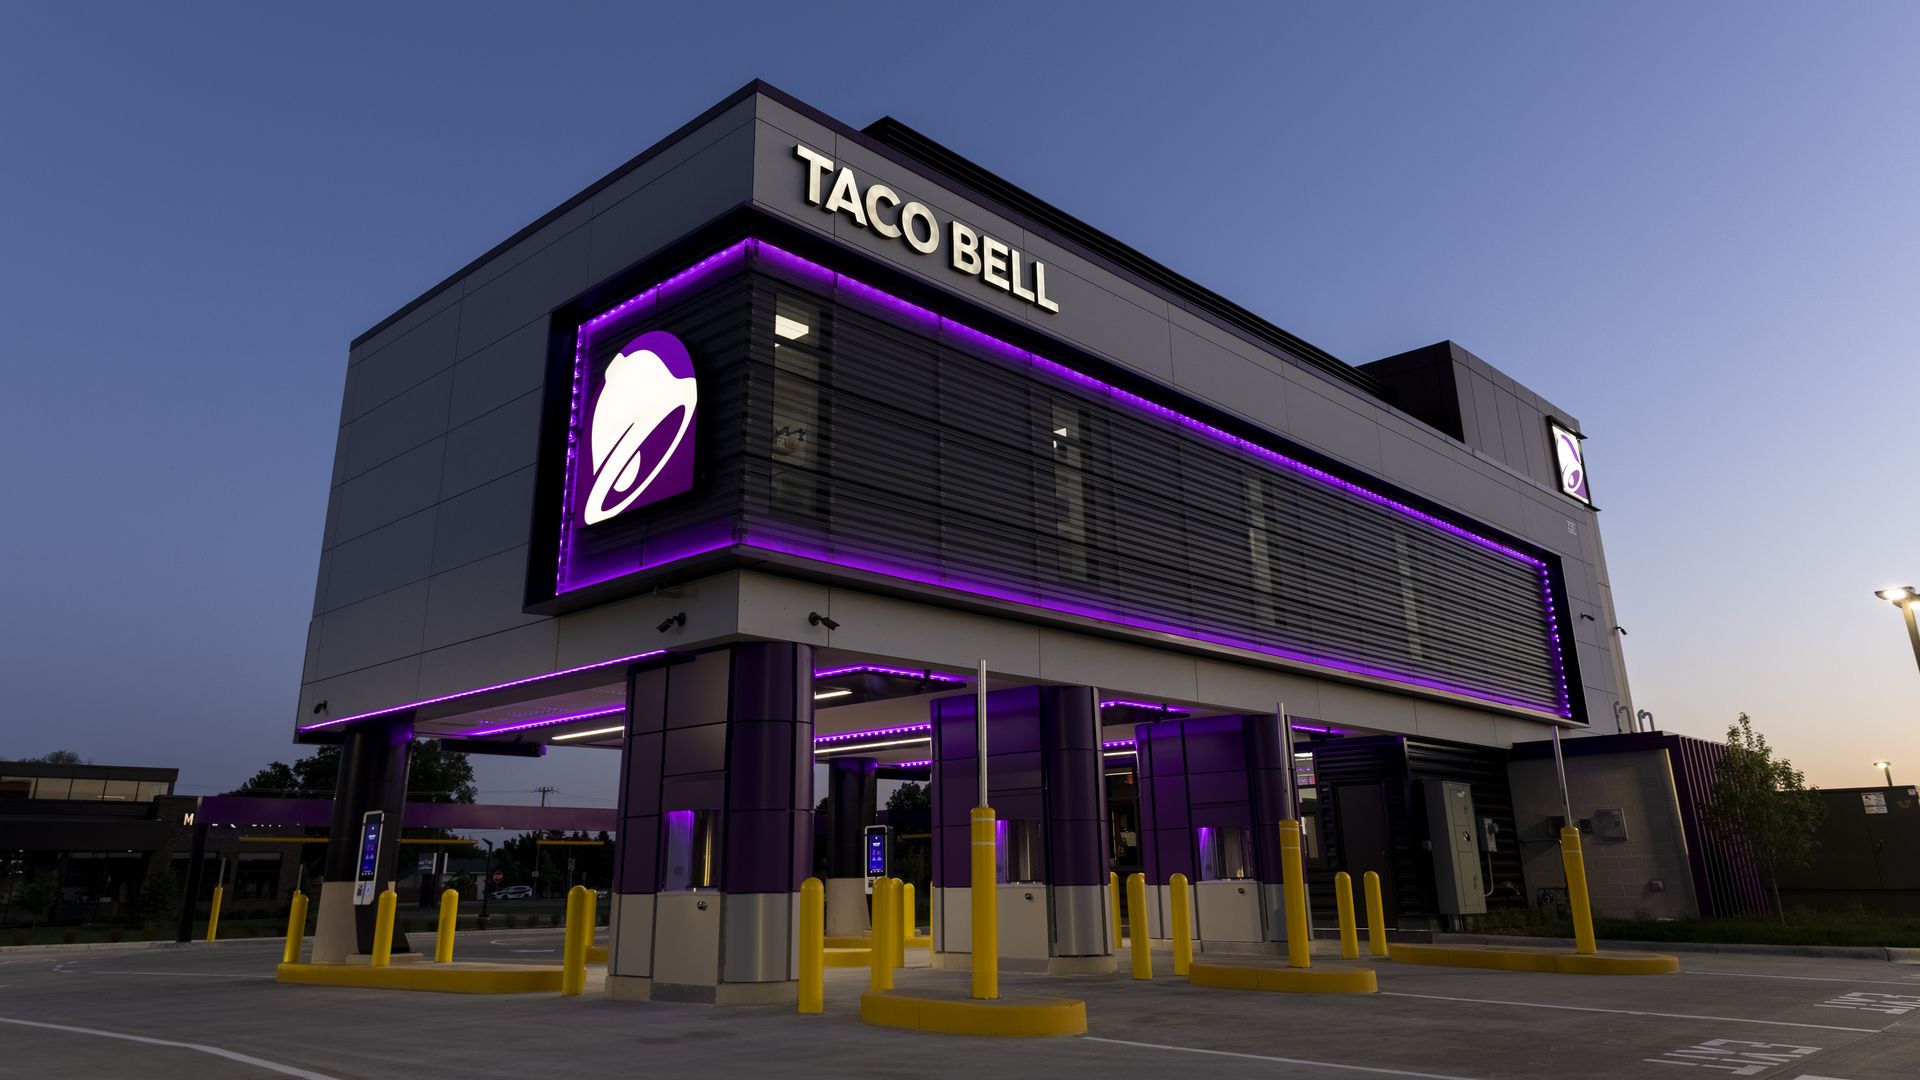 Taco Bell restaurant with four drive-thru lanes